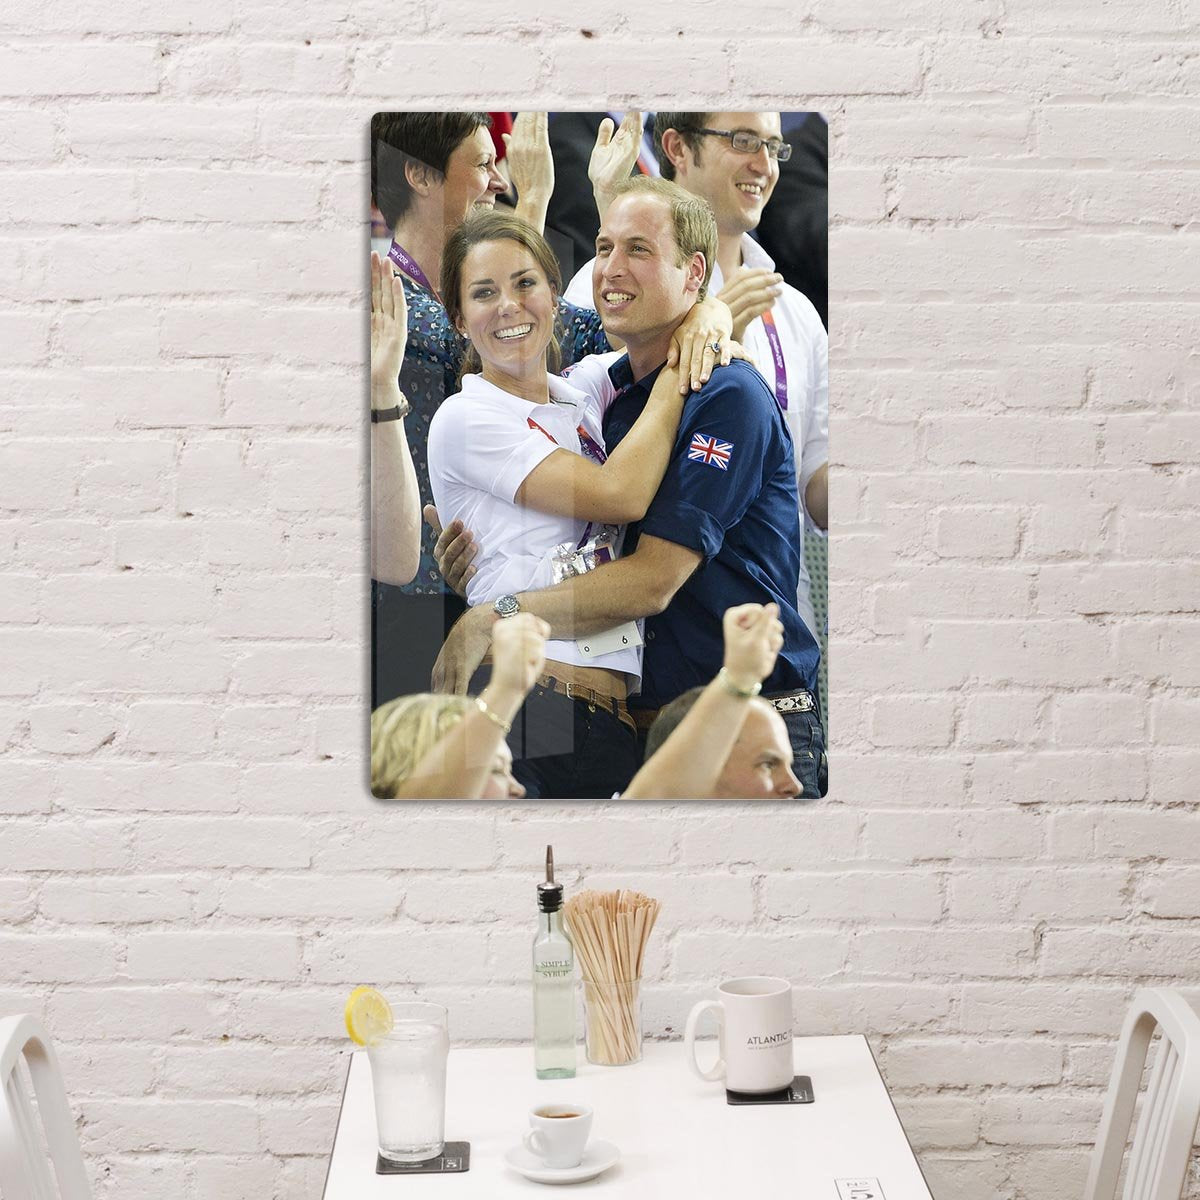 Prince William and Kate hugging at the 2012 Olympics HD Metal Print